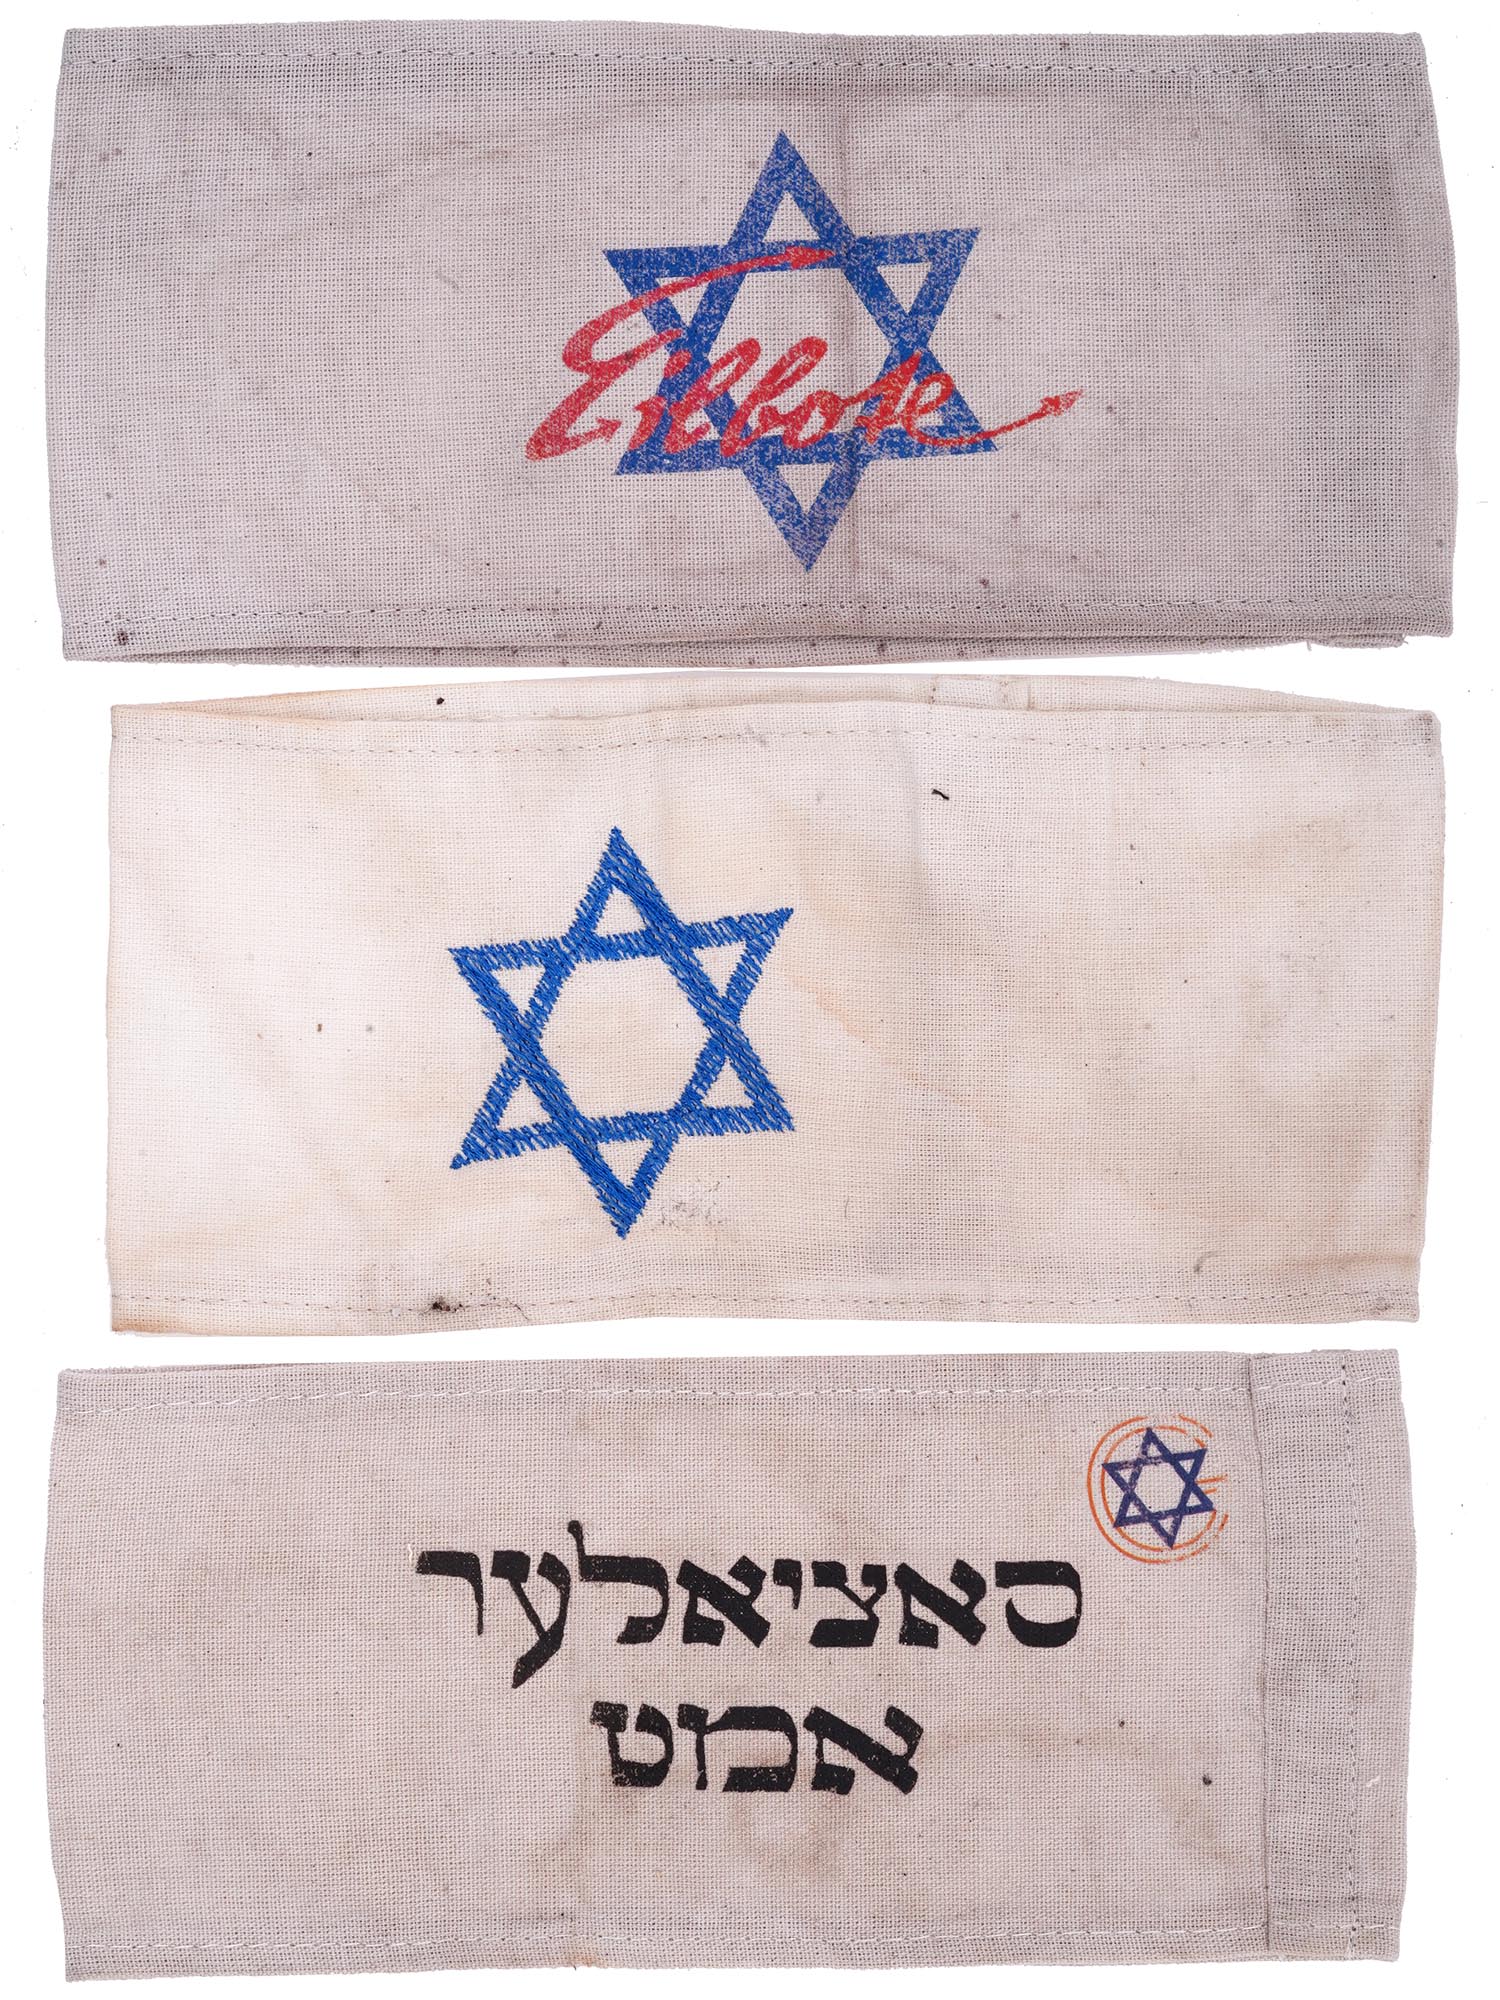 WWII JEWISH GHETTO AND CONCENTRATION CAMP ARMBANDS PIC-0